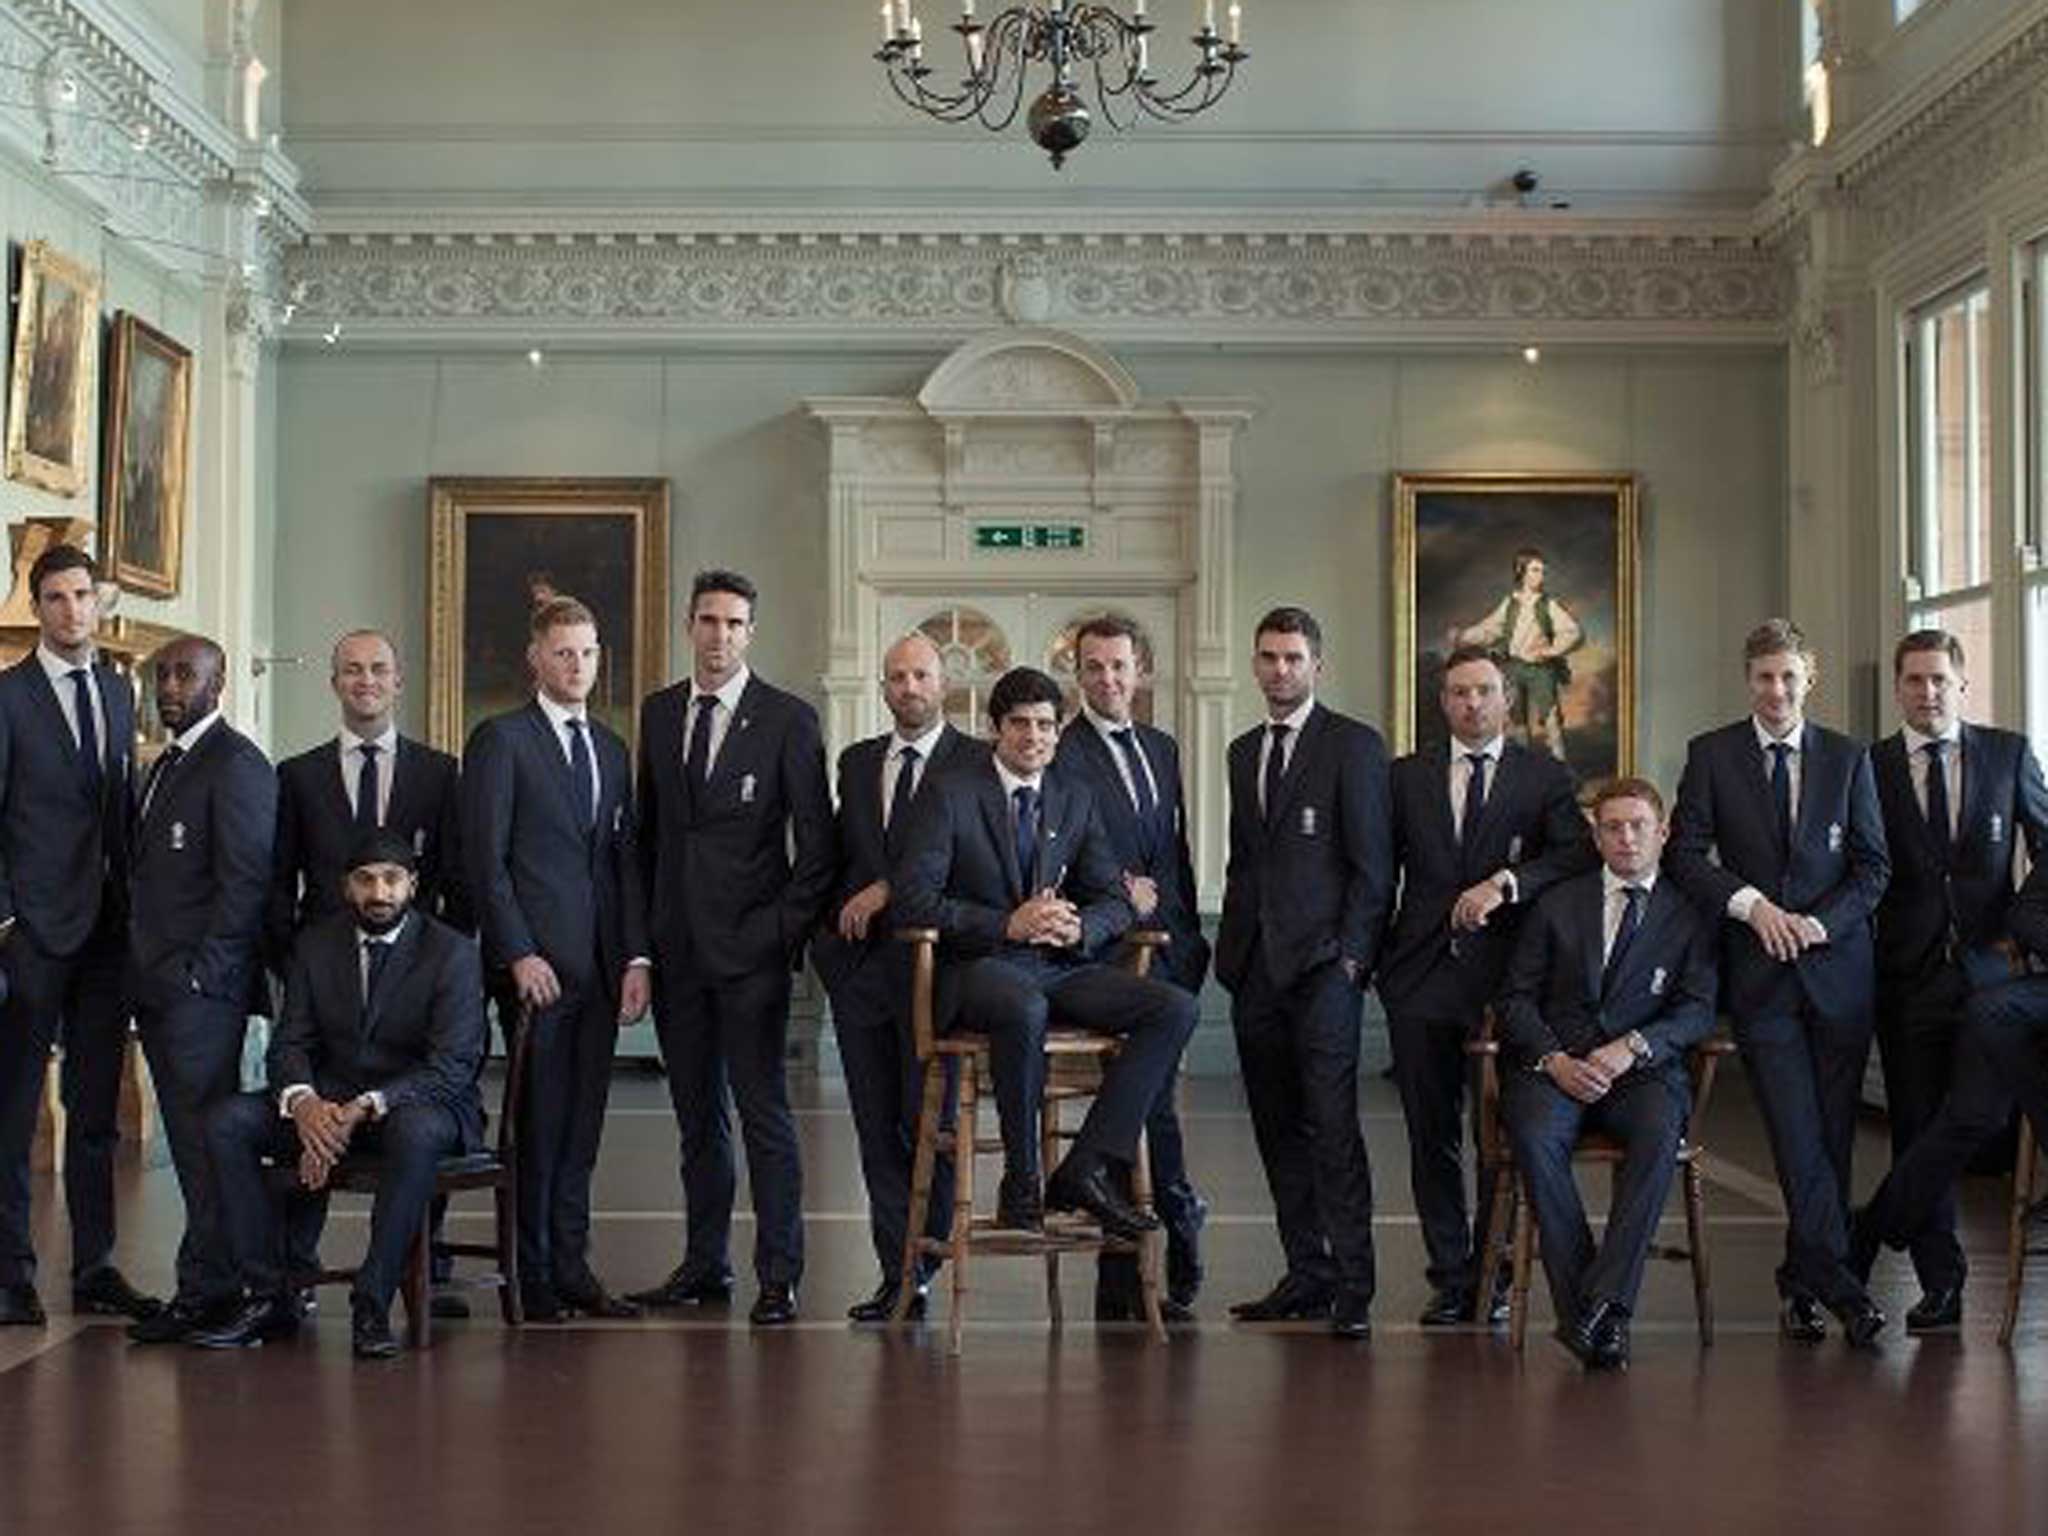 Members of the England team including Monty Panesar (bottom left) and Alastair Cook (centre seated) at Lord’s yesterday